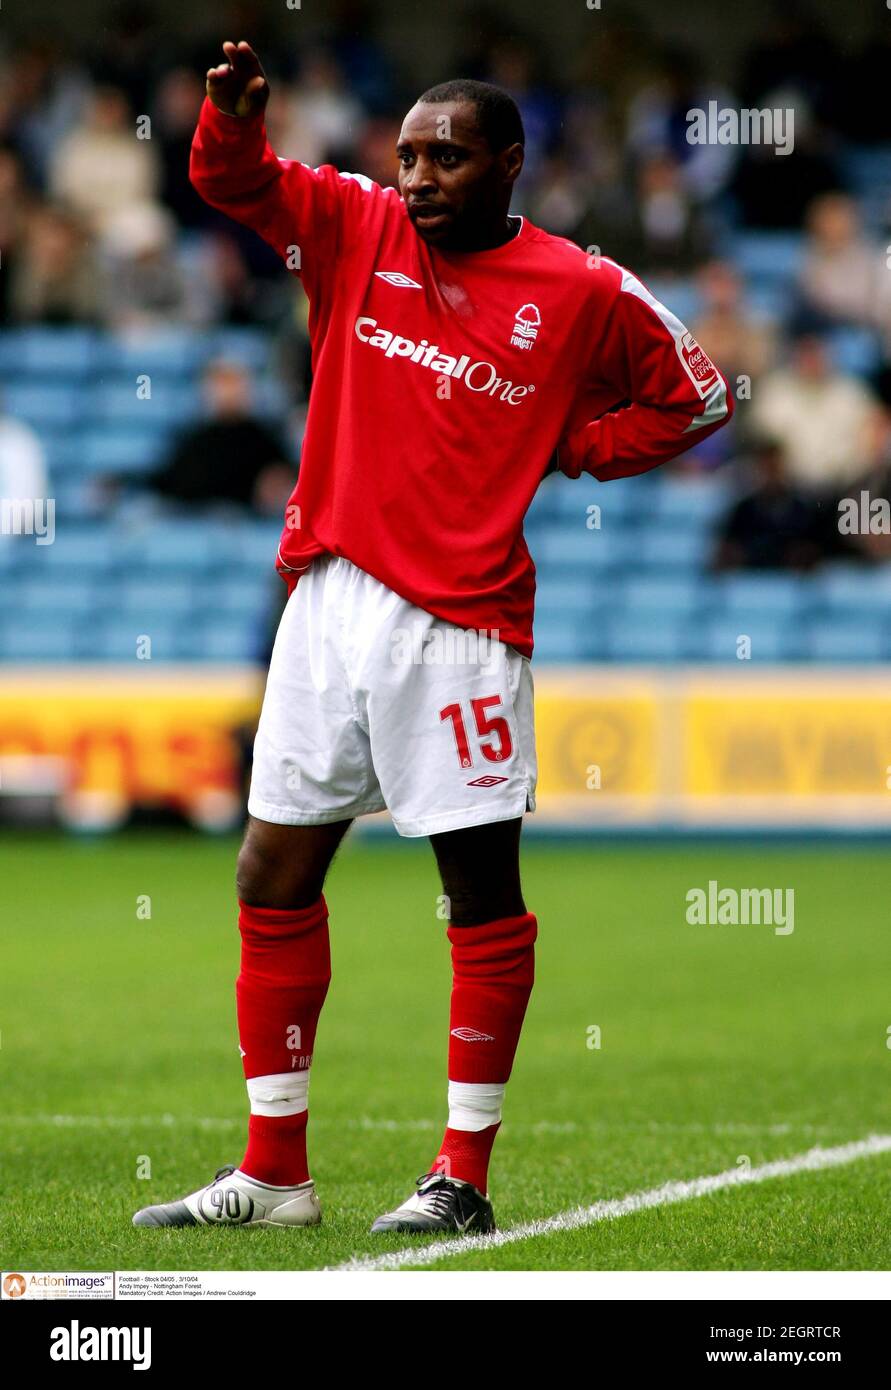 football-stock-0405-31004-andy-impey-nottingham-forest-mandatory-credit-action-images-andrew-couldridge-2EGRTCR.jpg